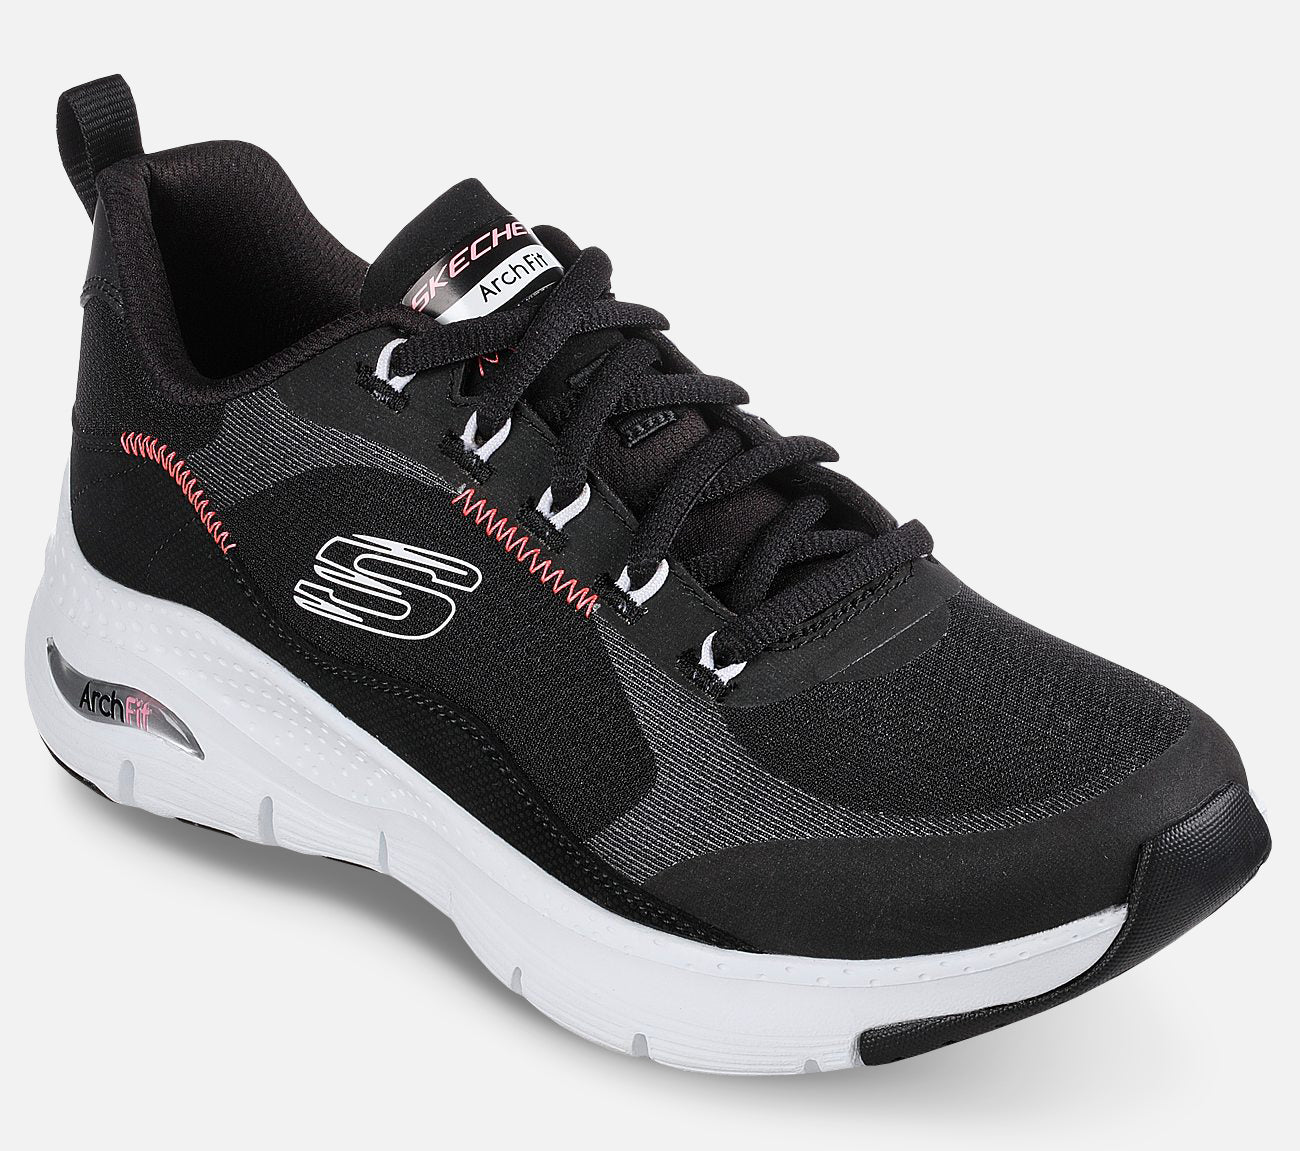 Arch Fit - Cool Oasis Shoe Skechers